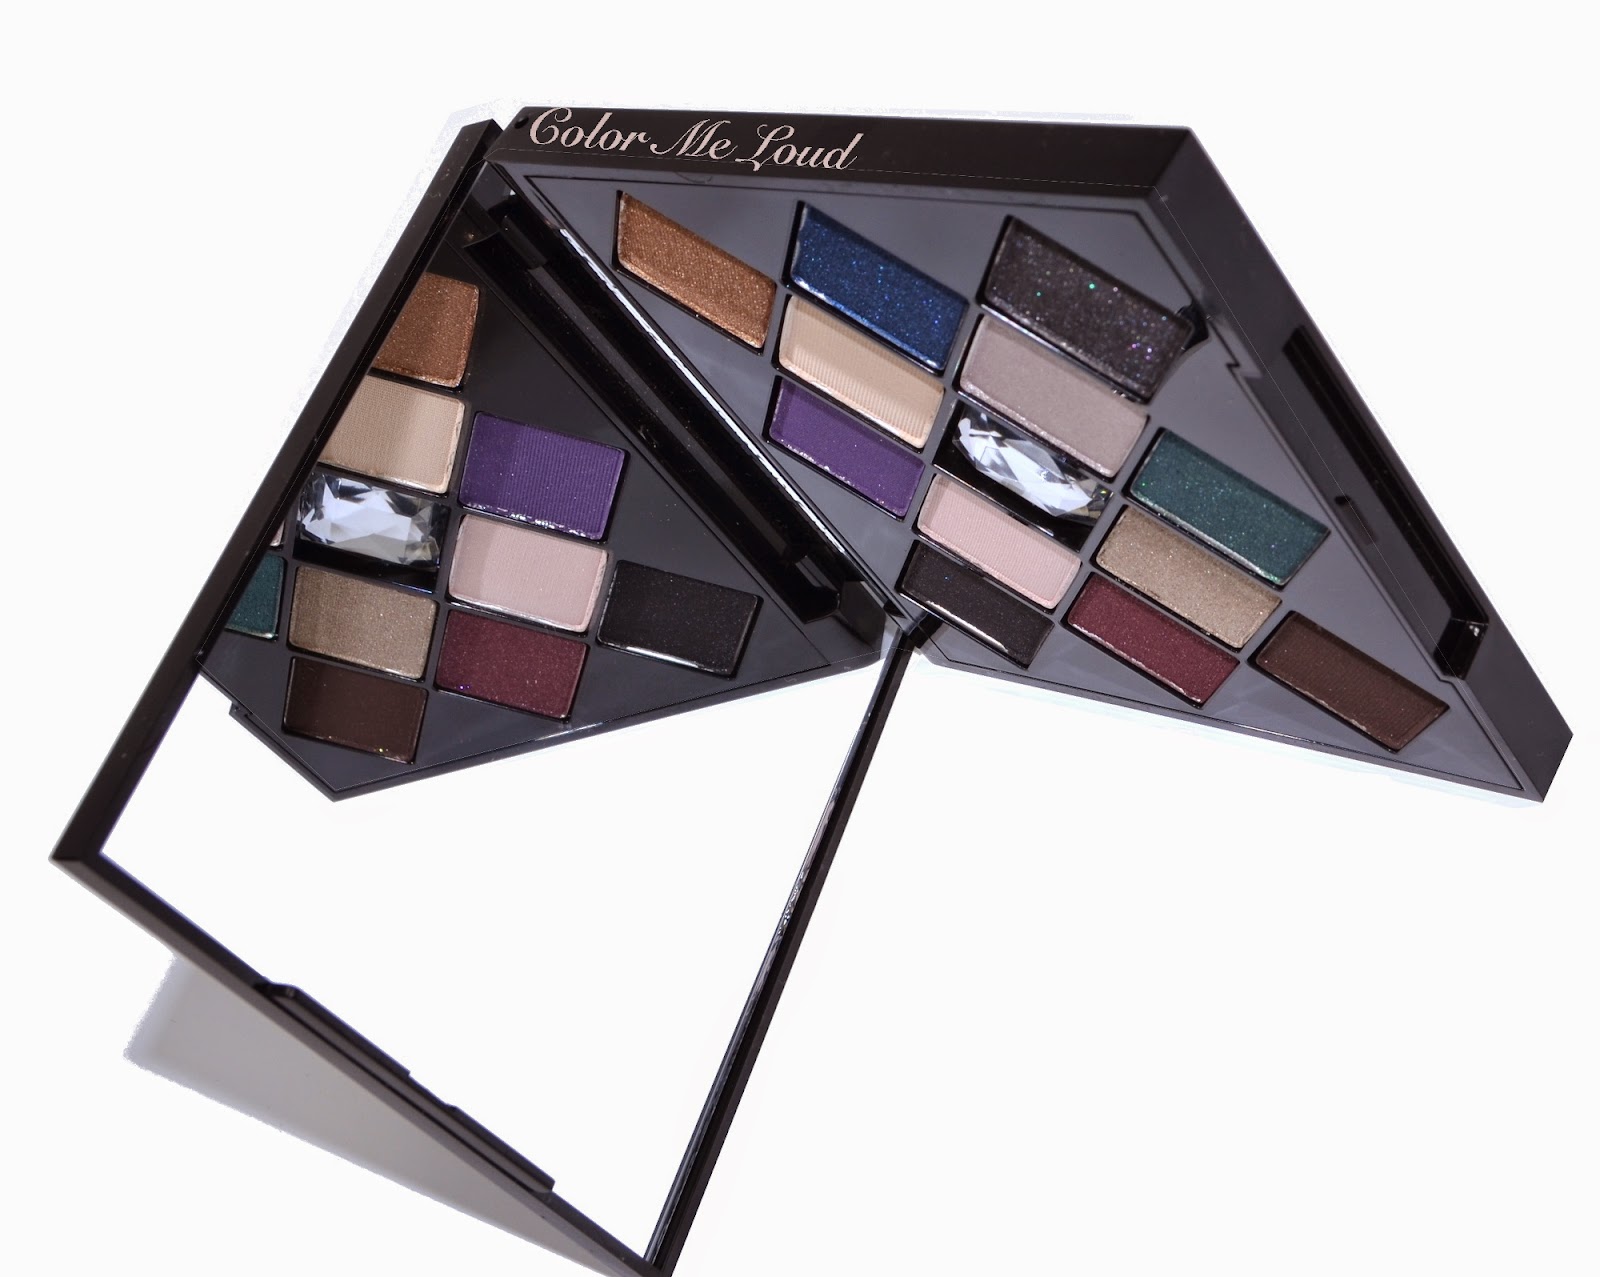 Smashbox On The Rocks Photo Op Eye Shadow Palette for Holiday 2014, Review, Swatch & FOTD 